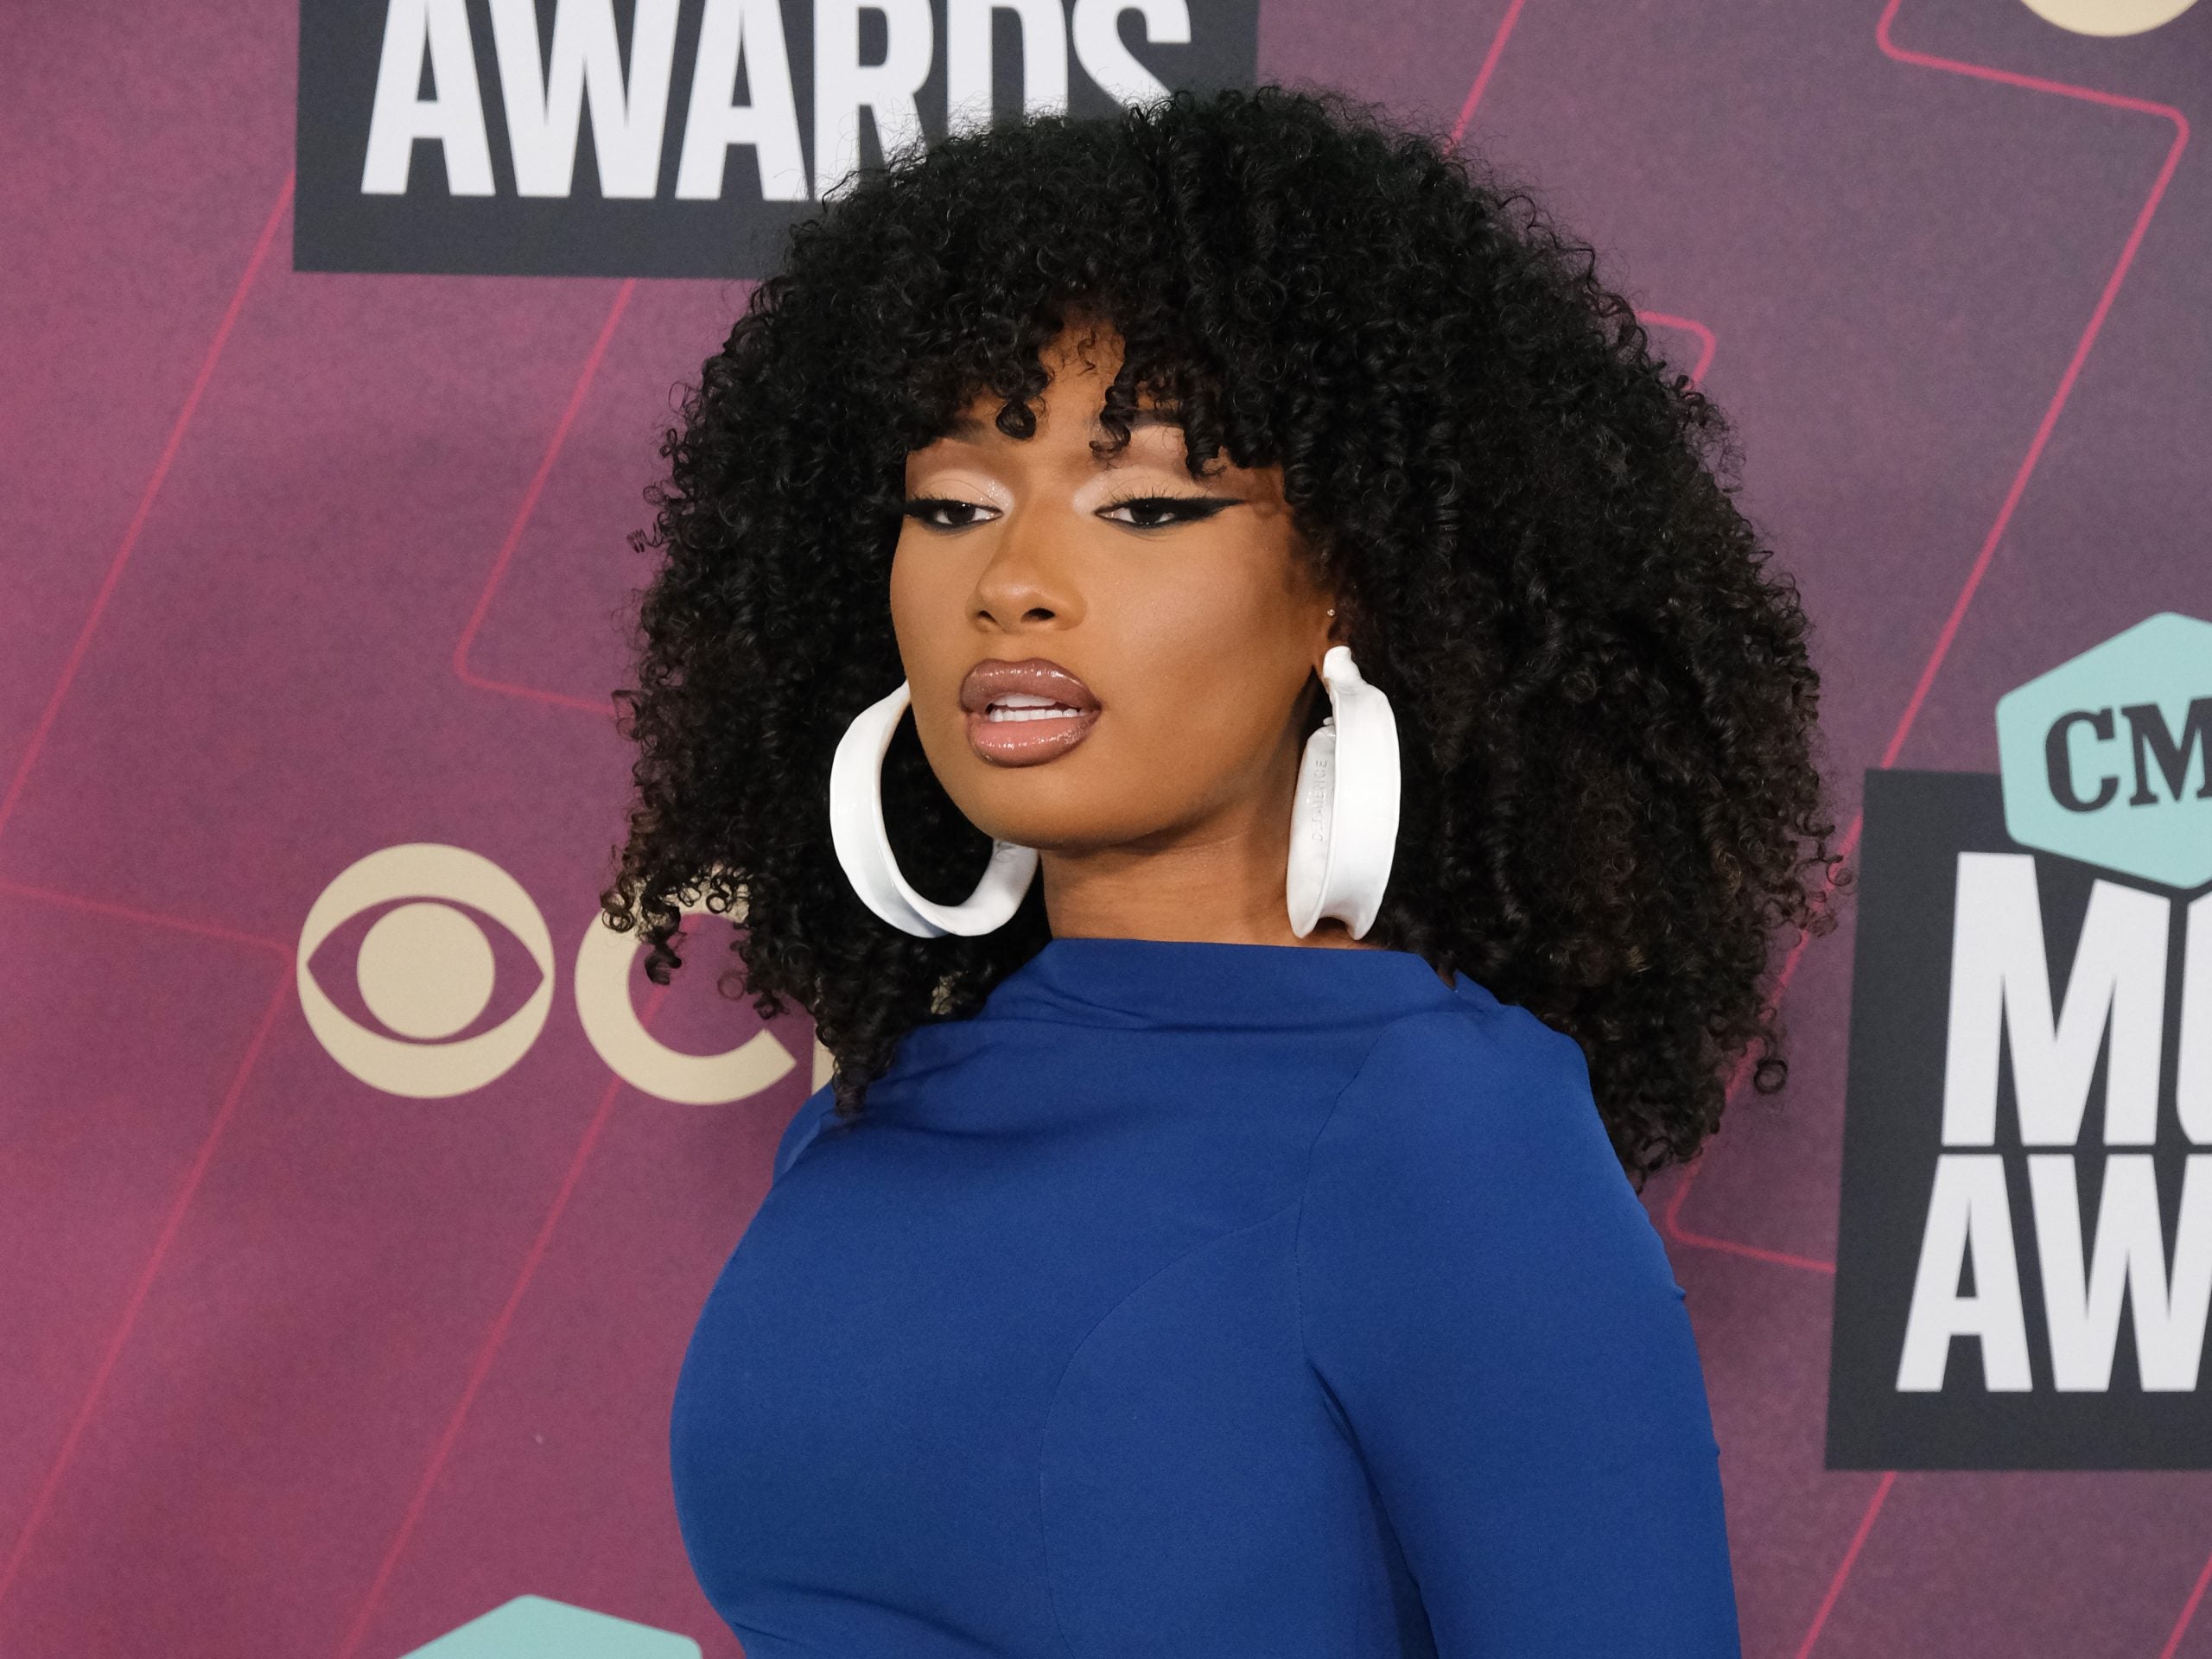 Megan Thee Stallion Looks Gorgeous In Blue For The CMT Awards